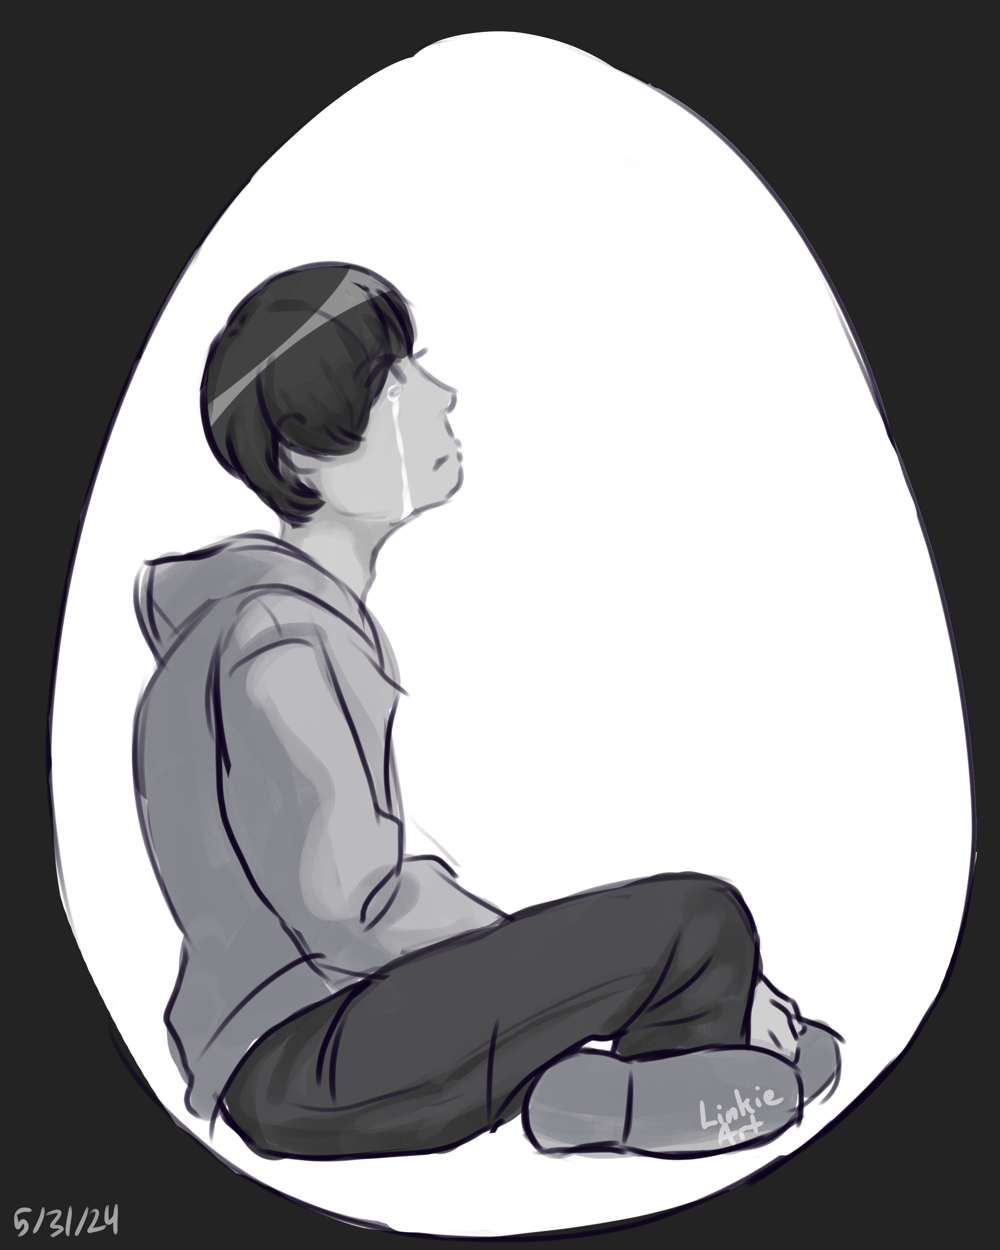 Fanart of Hotaro from Kamen Rider Gotchard. He is sitting down inside an egg and is seen in a profile view. He is looking up and crying.